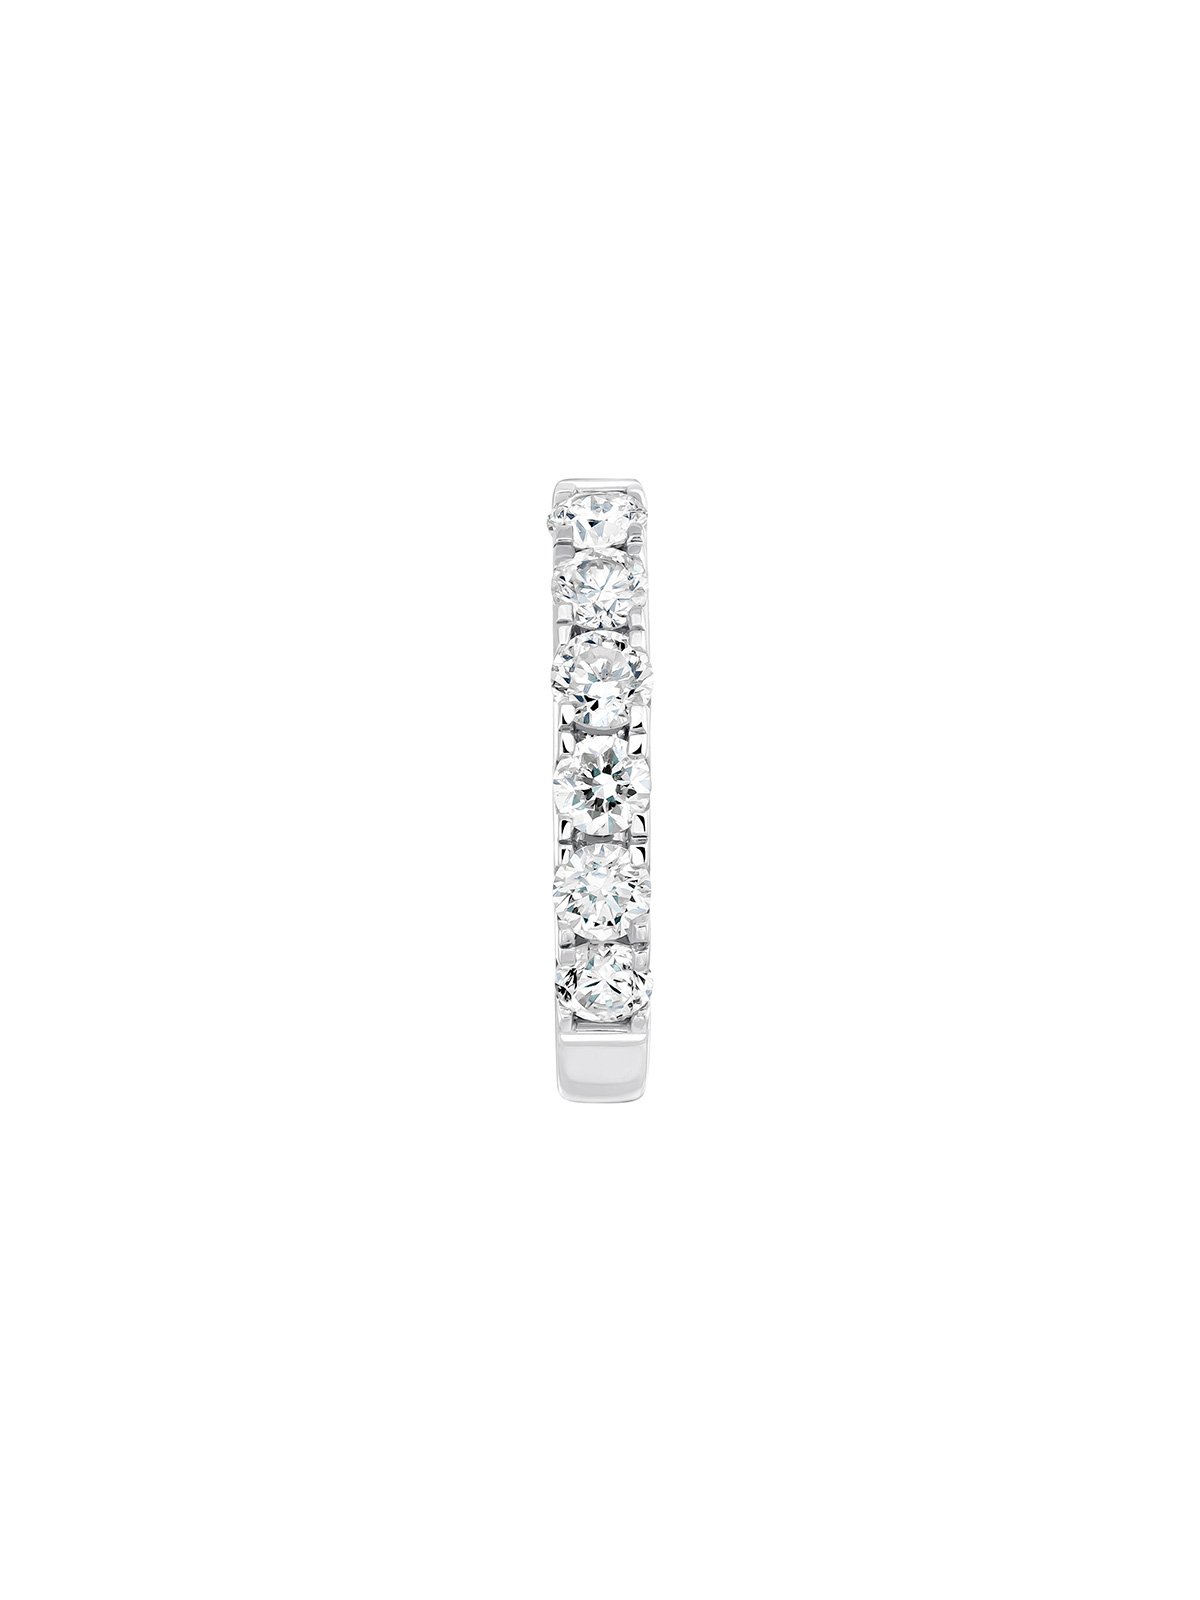 Individual 18K white gold earring with 0.16ct diamonds